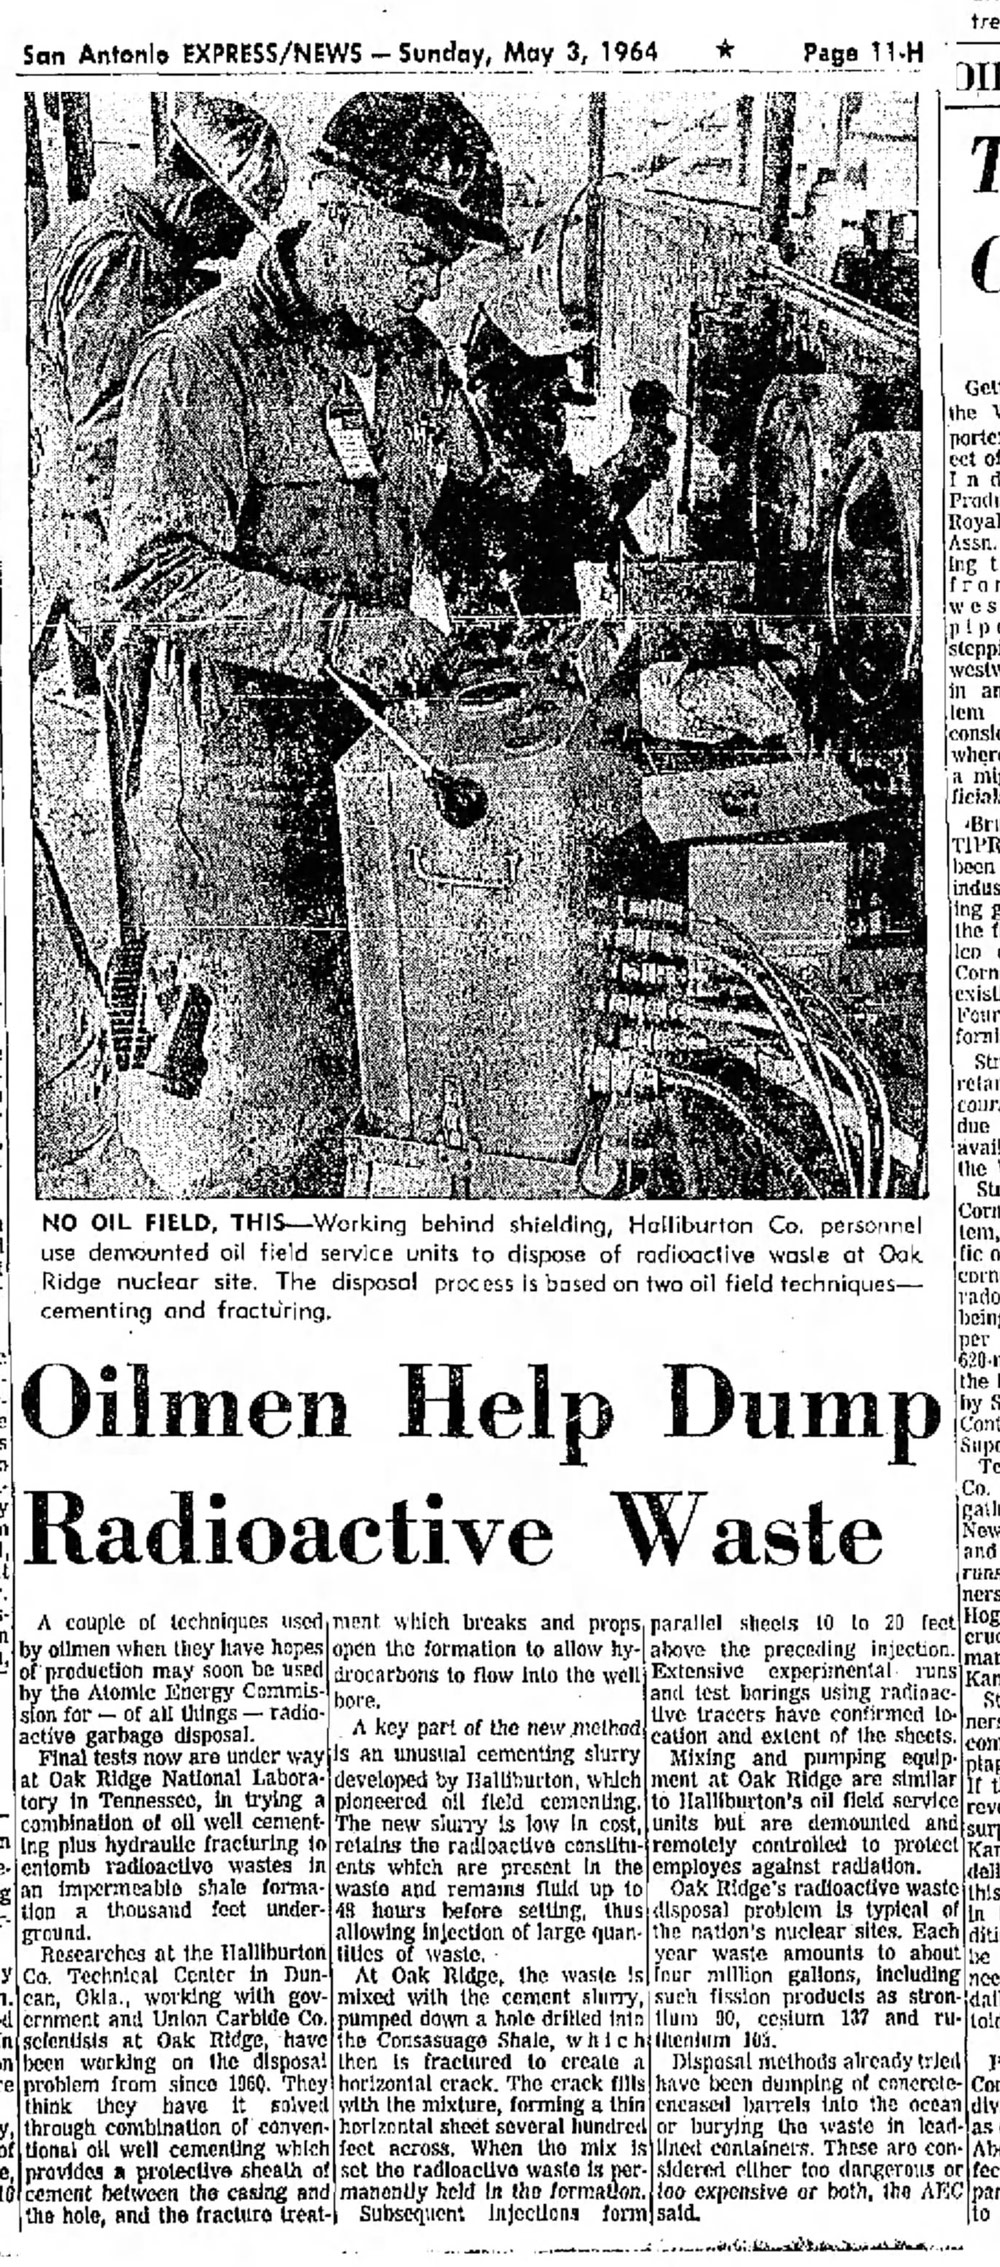 Shock - Fracking Used to Inject Nuclear Waste Underground for Decades - May 3, 1964 edition of the San Antonio Express News